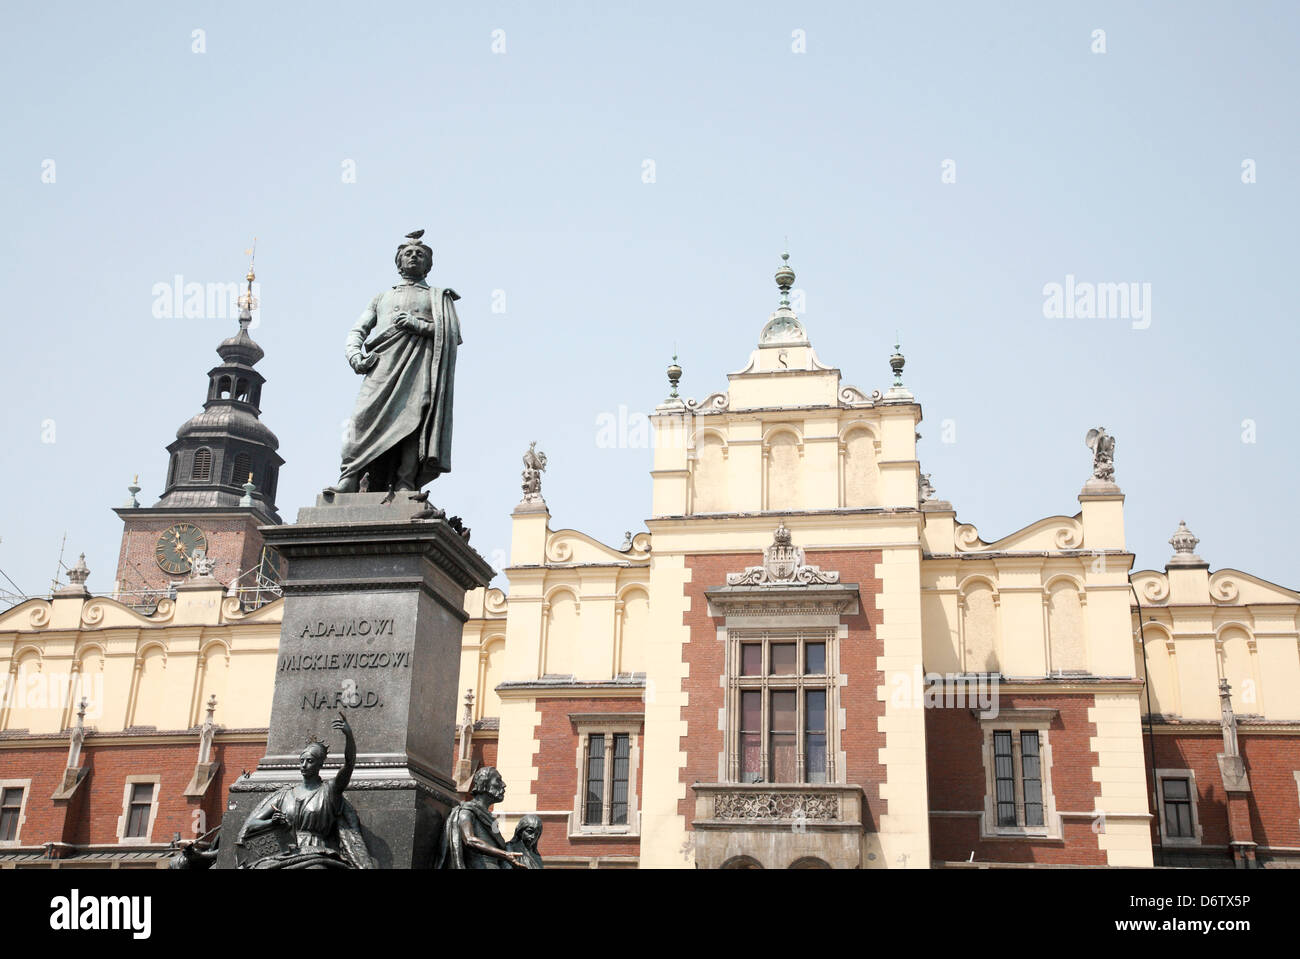 Statue of National Poet Adam Mickiewicz in front of Old Cloth Hall, Krakow, Poland Stock Photo